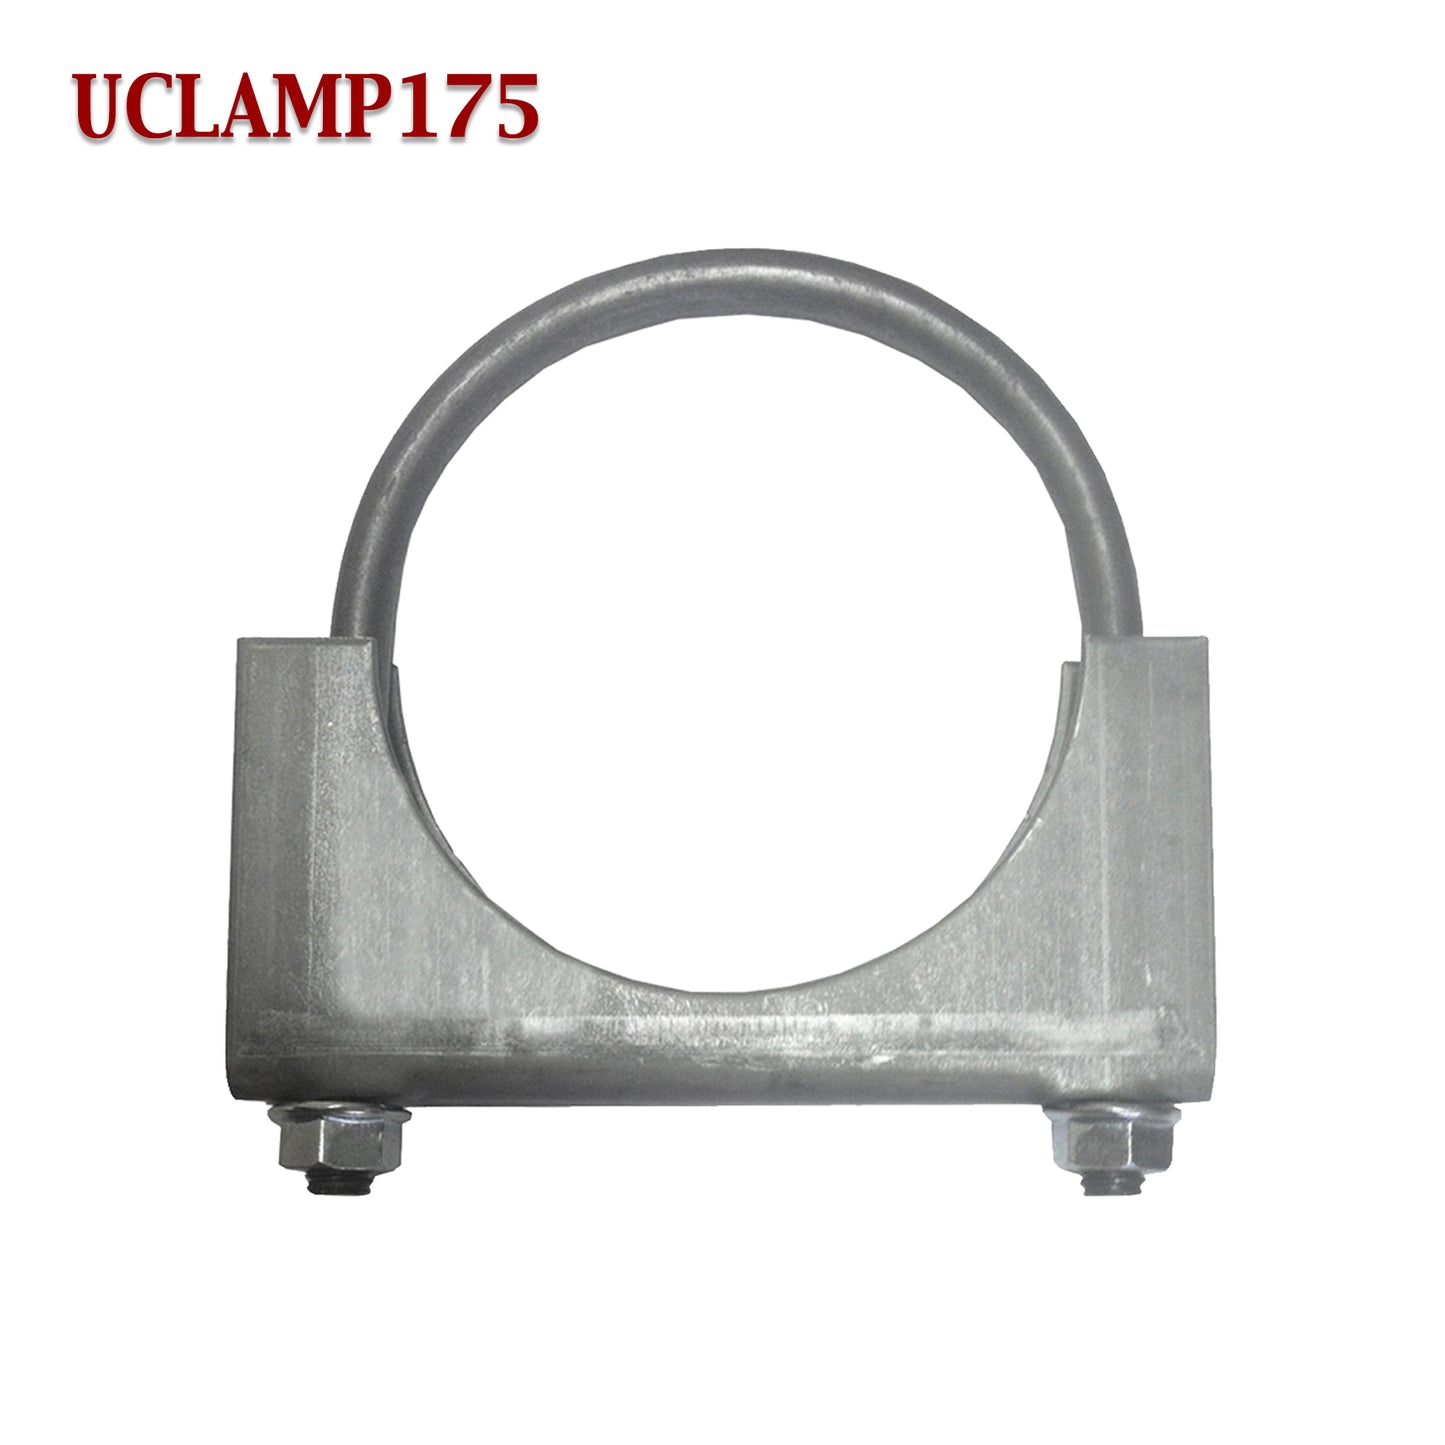 1 3/4" Exhaust Muffler Clamp U-Bolt Saddle Style For 1.75" Pipe